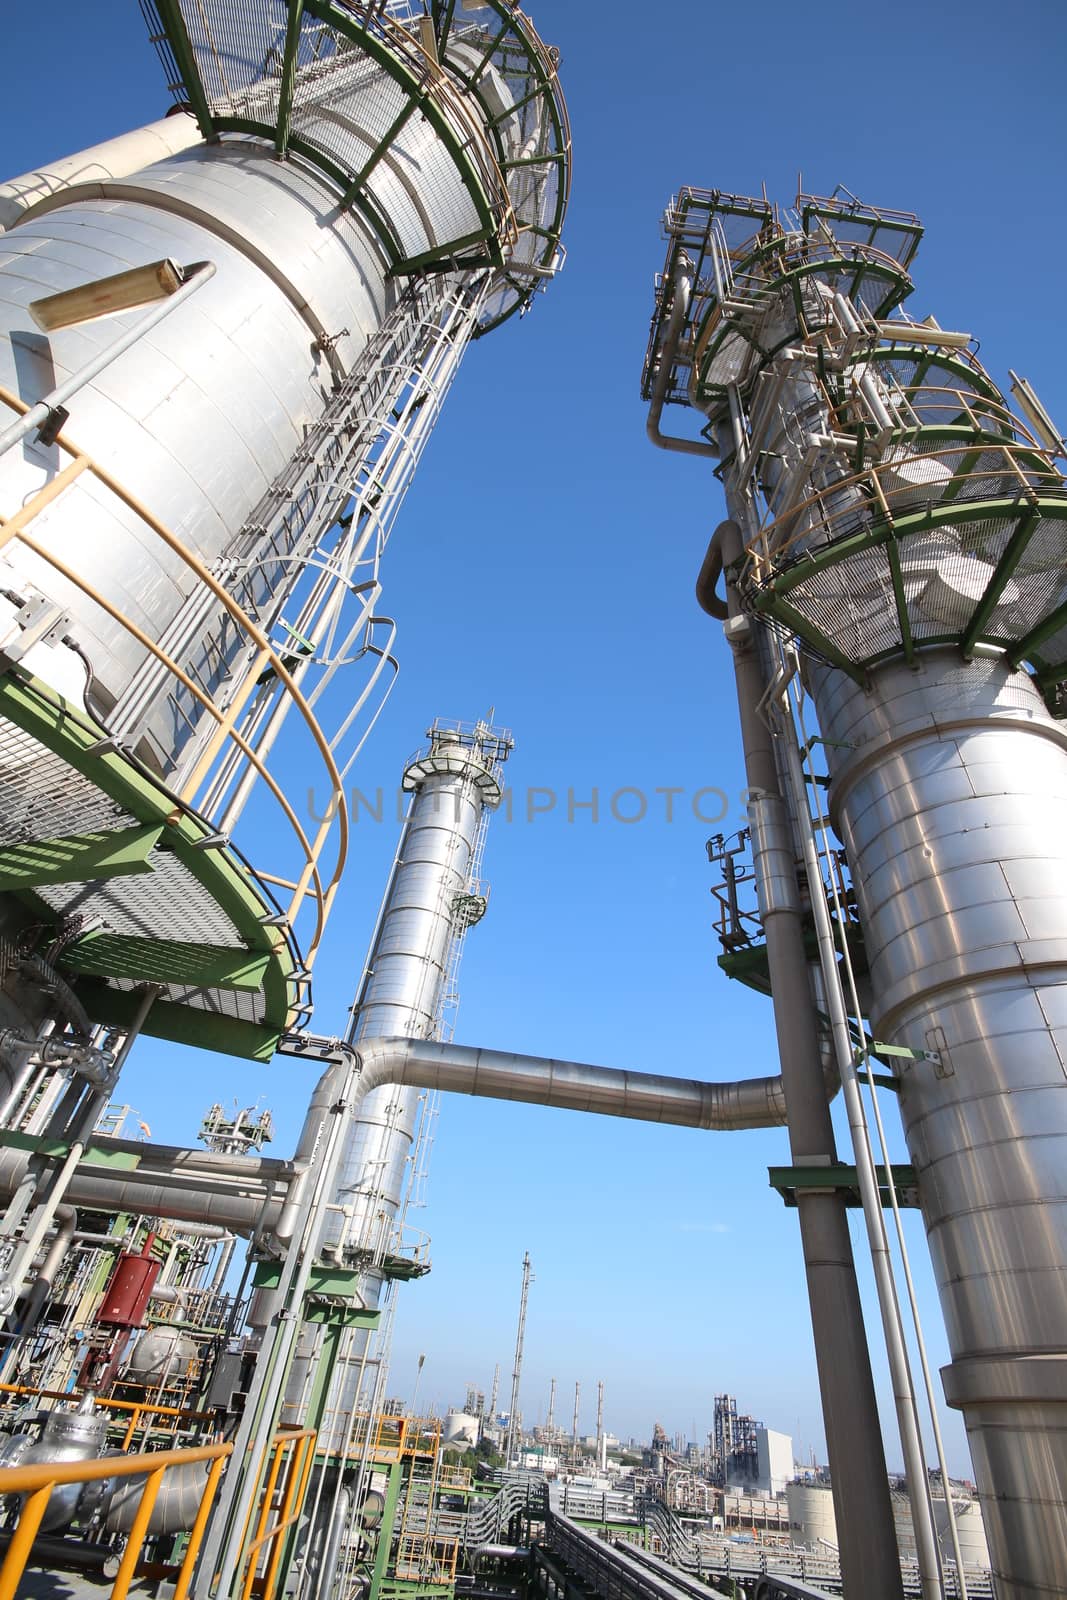 Refinery tower in petrochemical plant with blue sky 